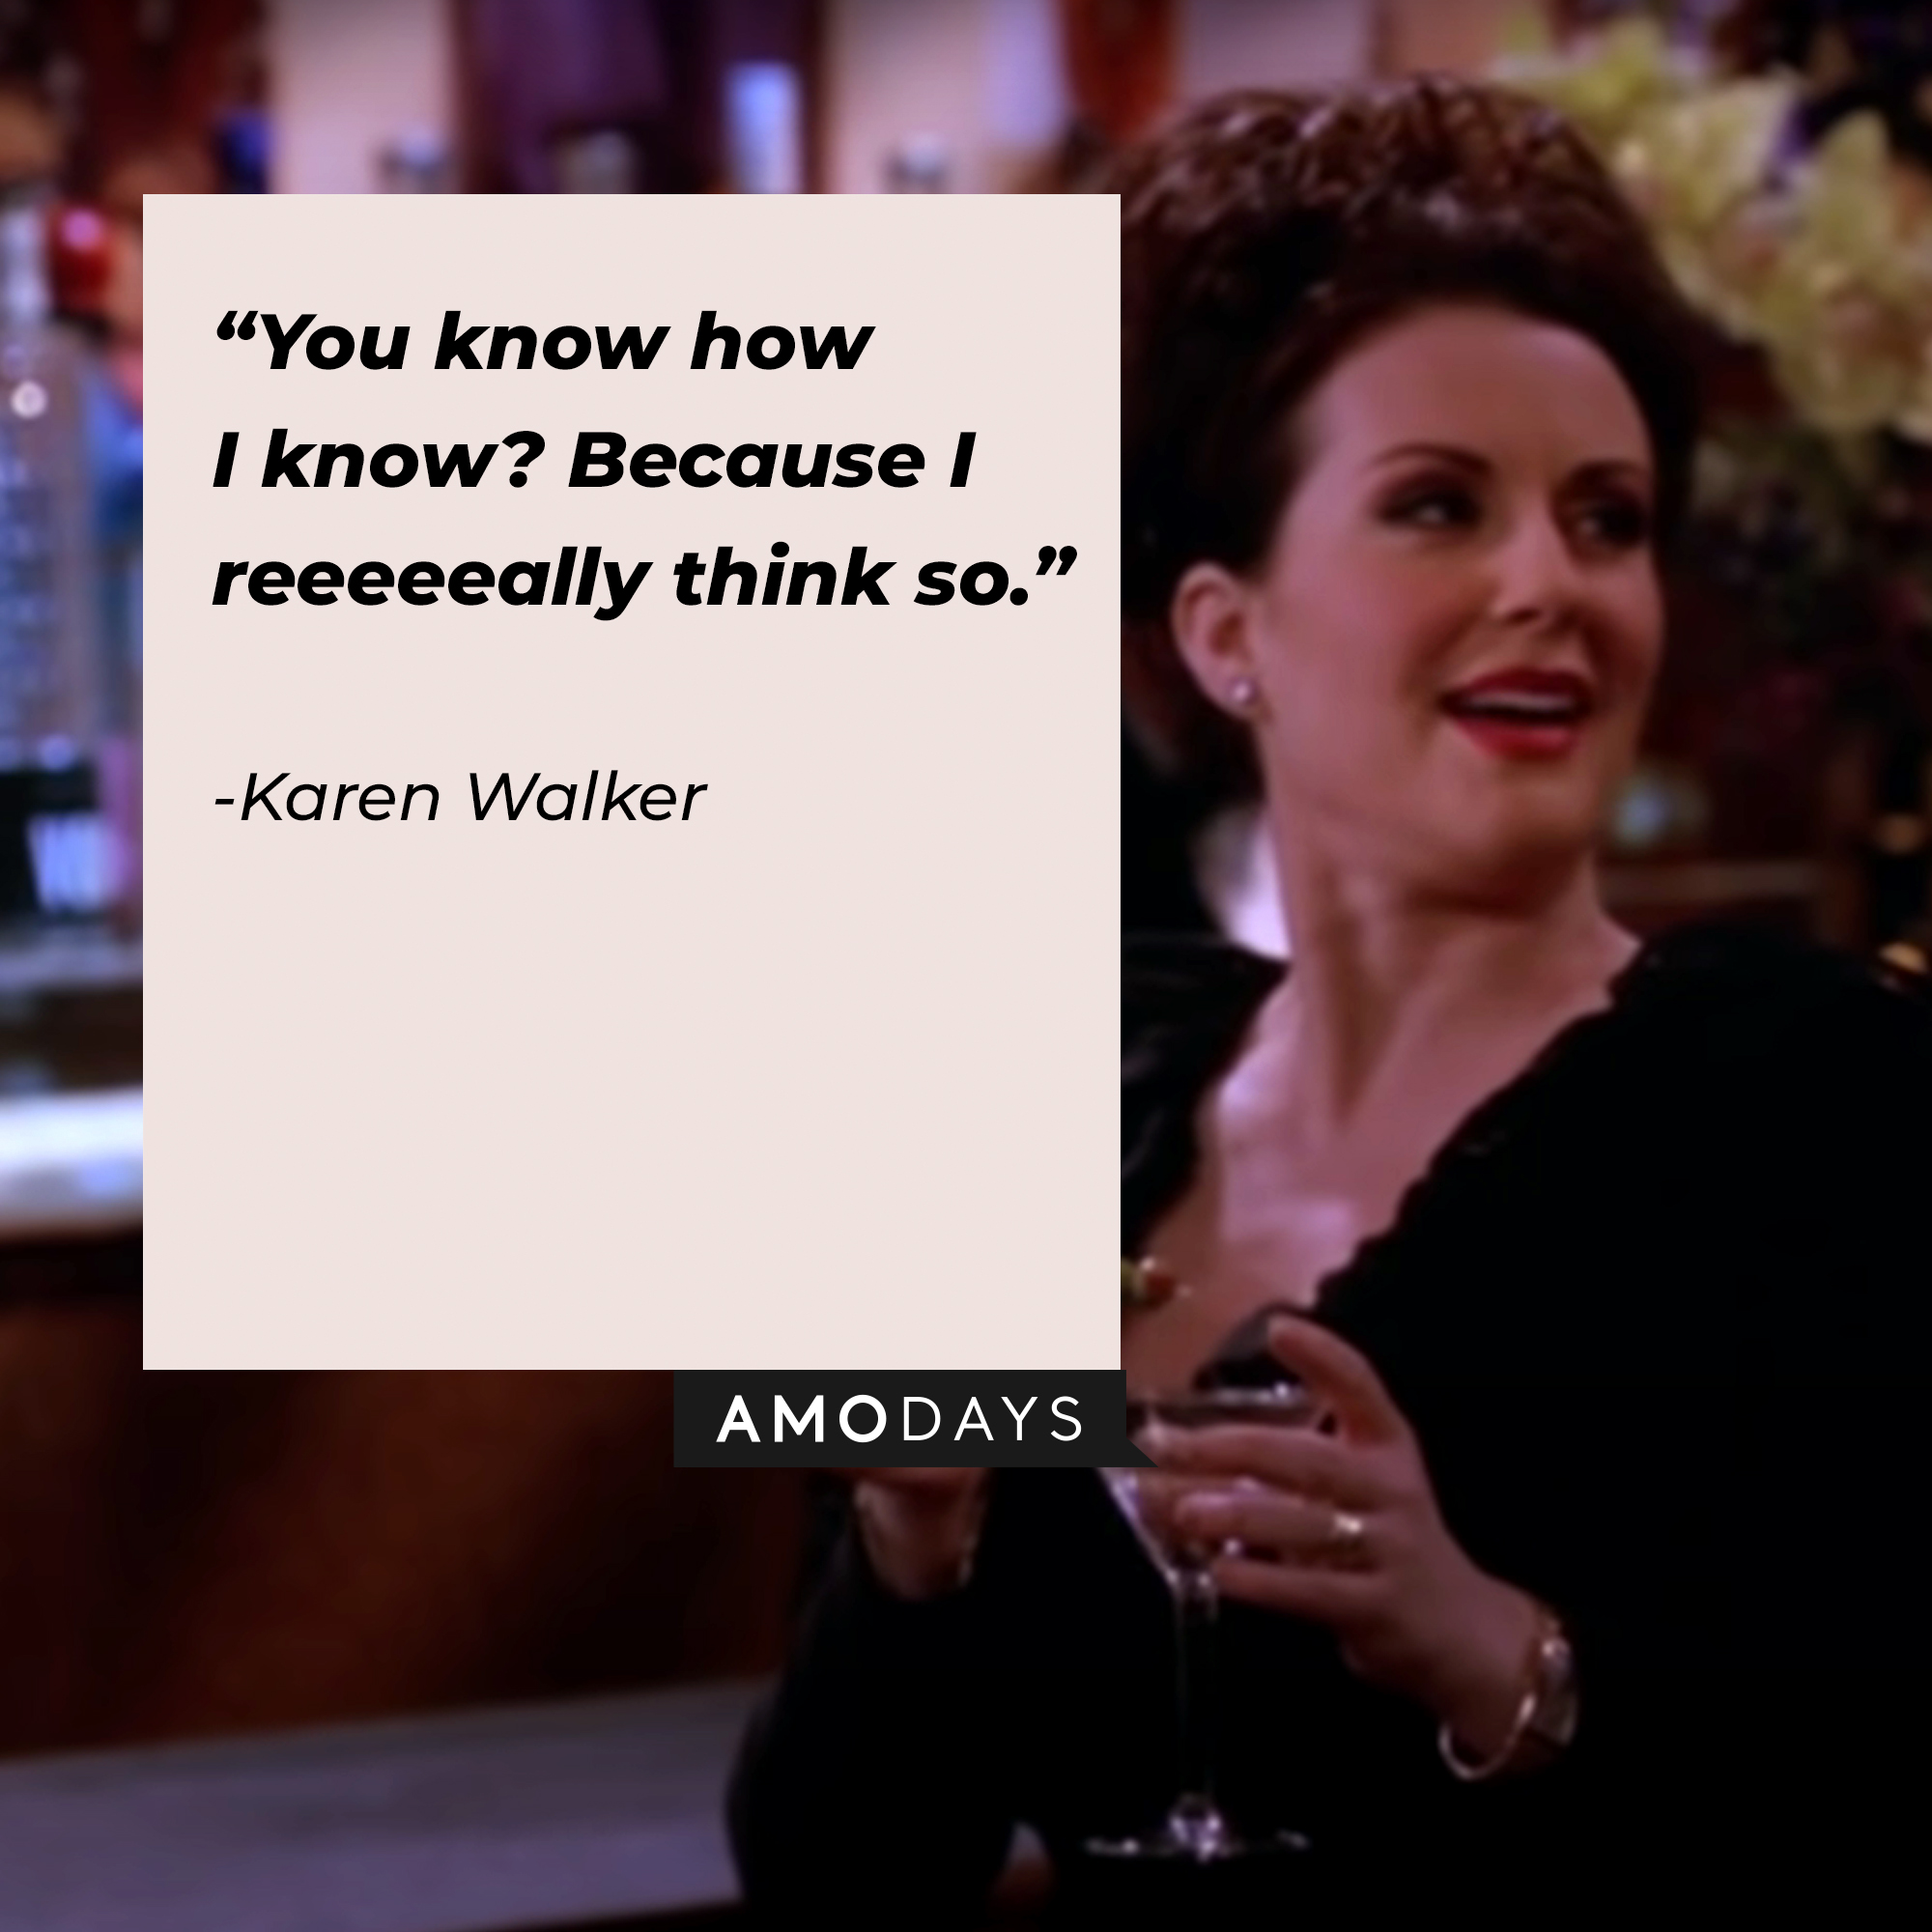 A photo of Karen Walker with the quote, "You know how I know? Because I reeeeeally think so." | Source: YouTube/ComedyBites